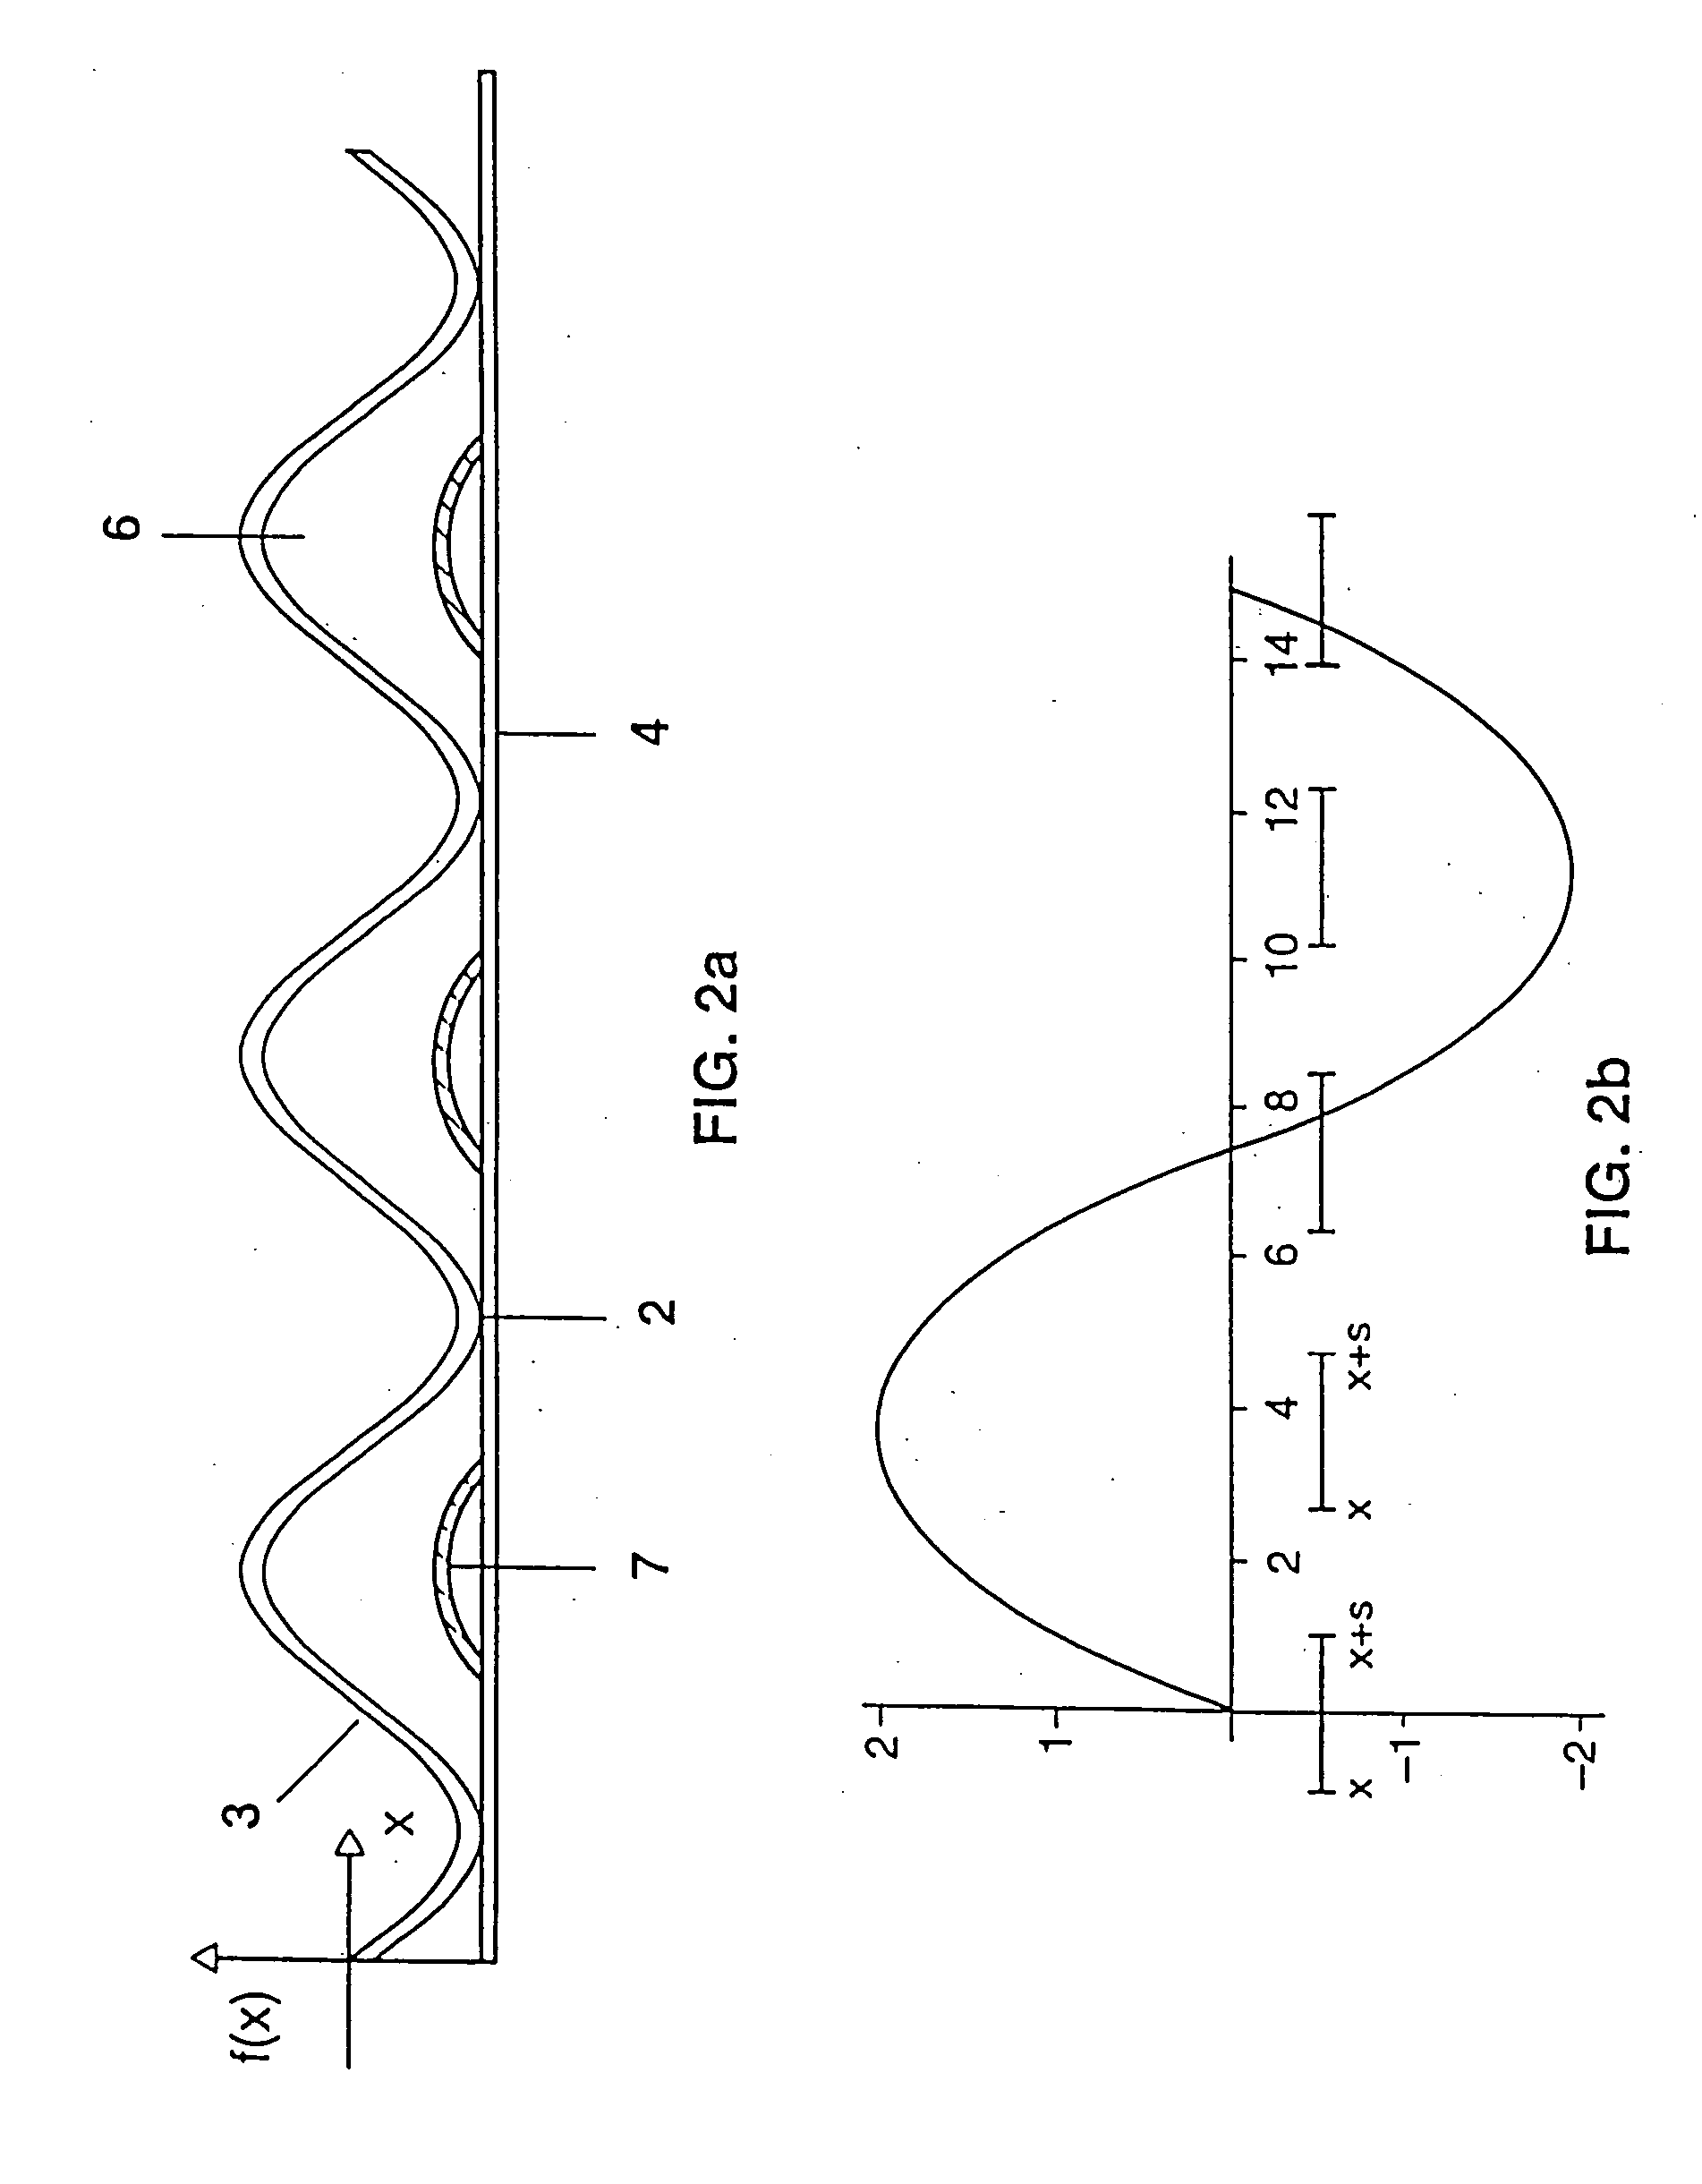 Discharge lamp for dielectrically impeded discharges having a corrugated cover plate structure